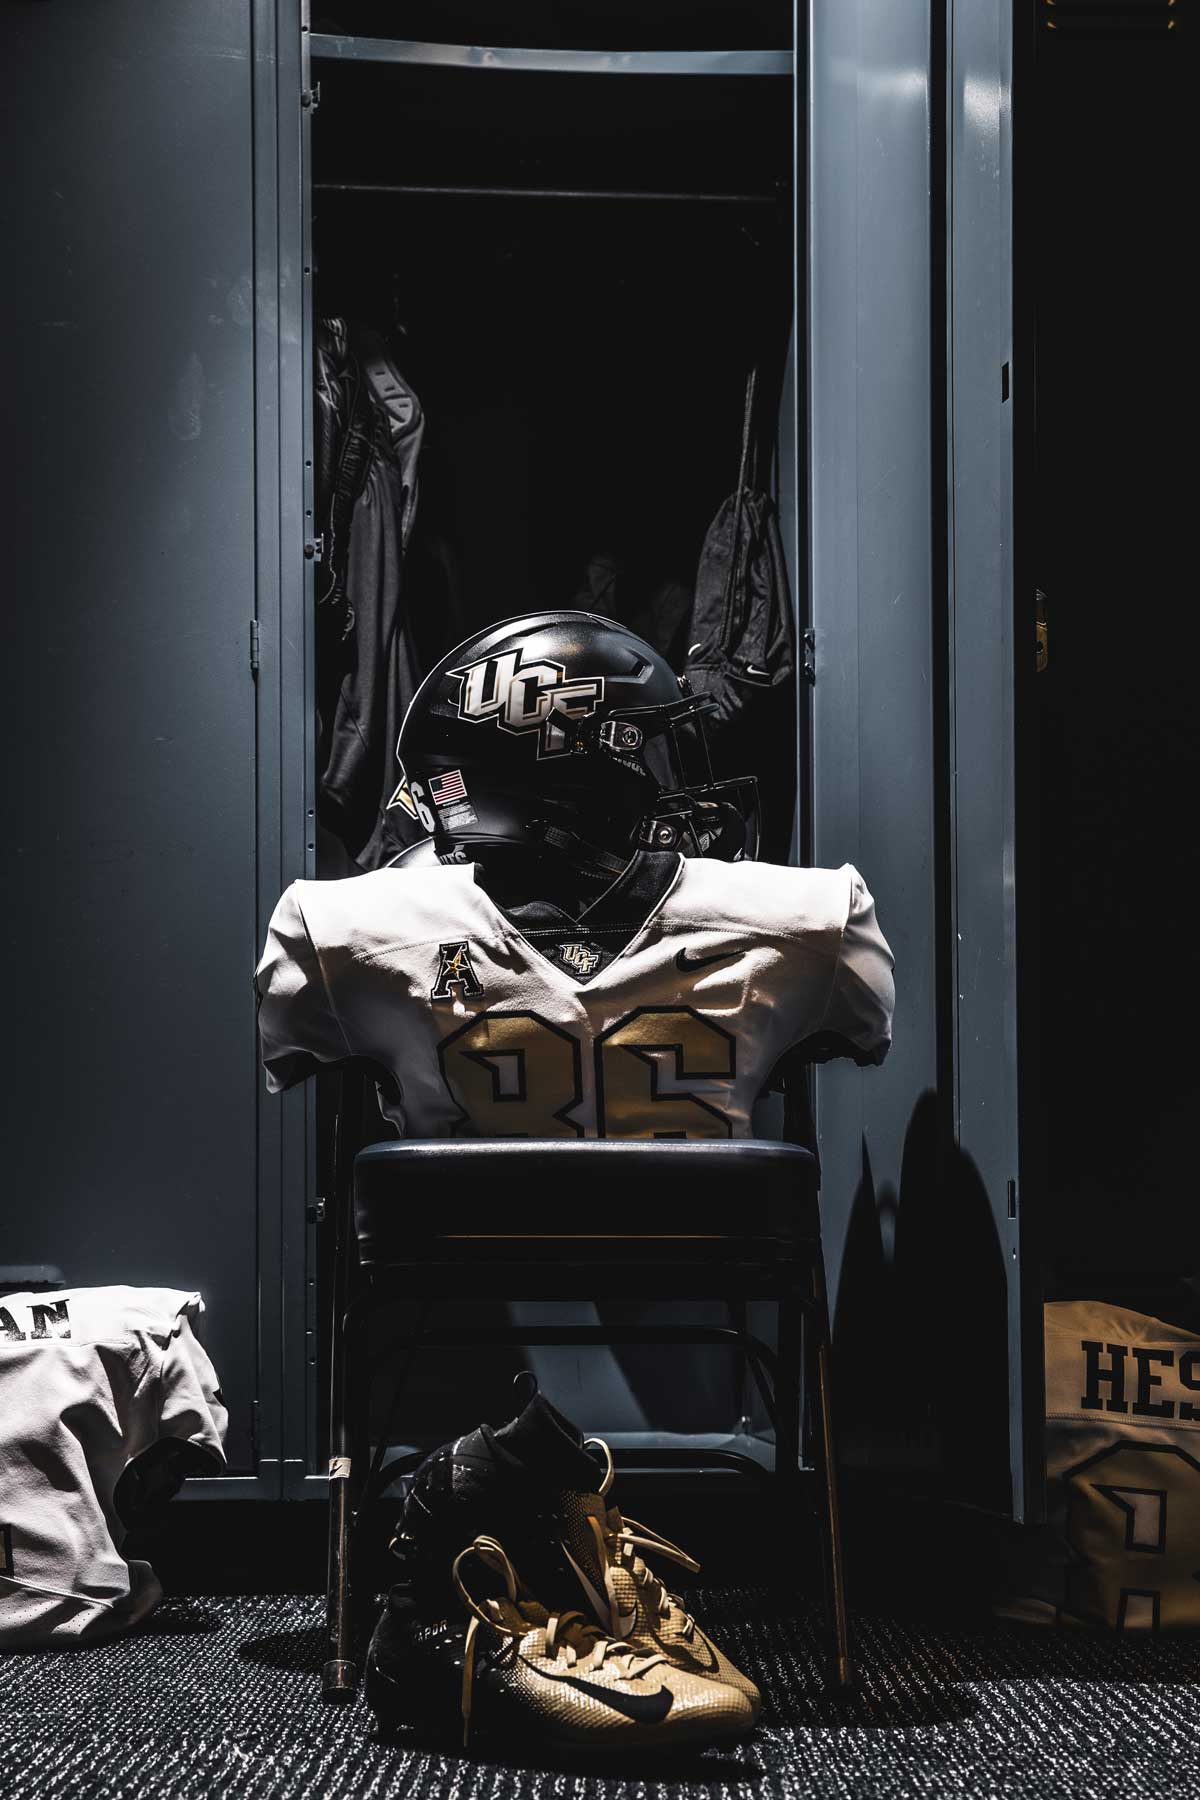 black helmet and white jersey in front of locker